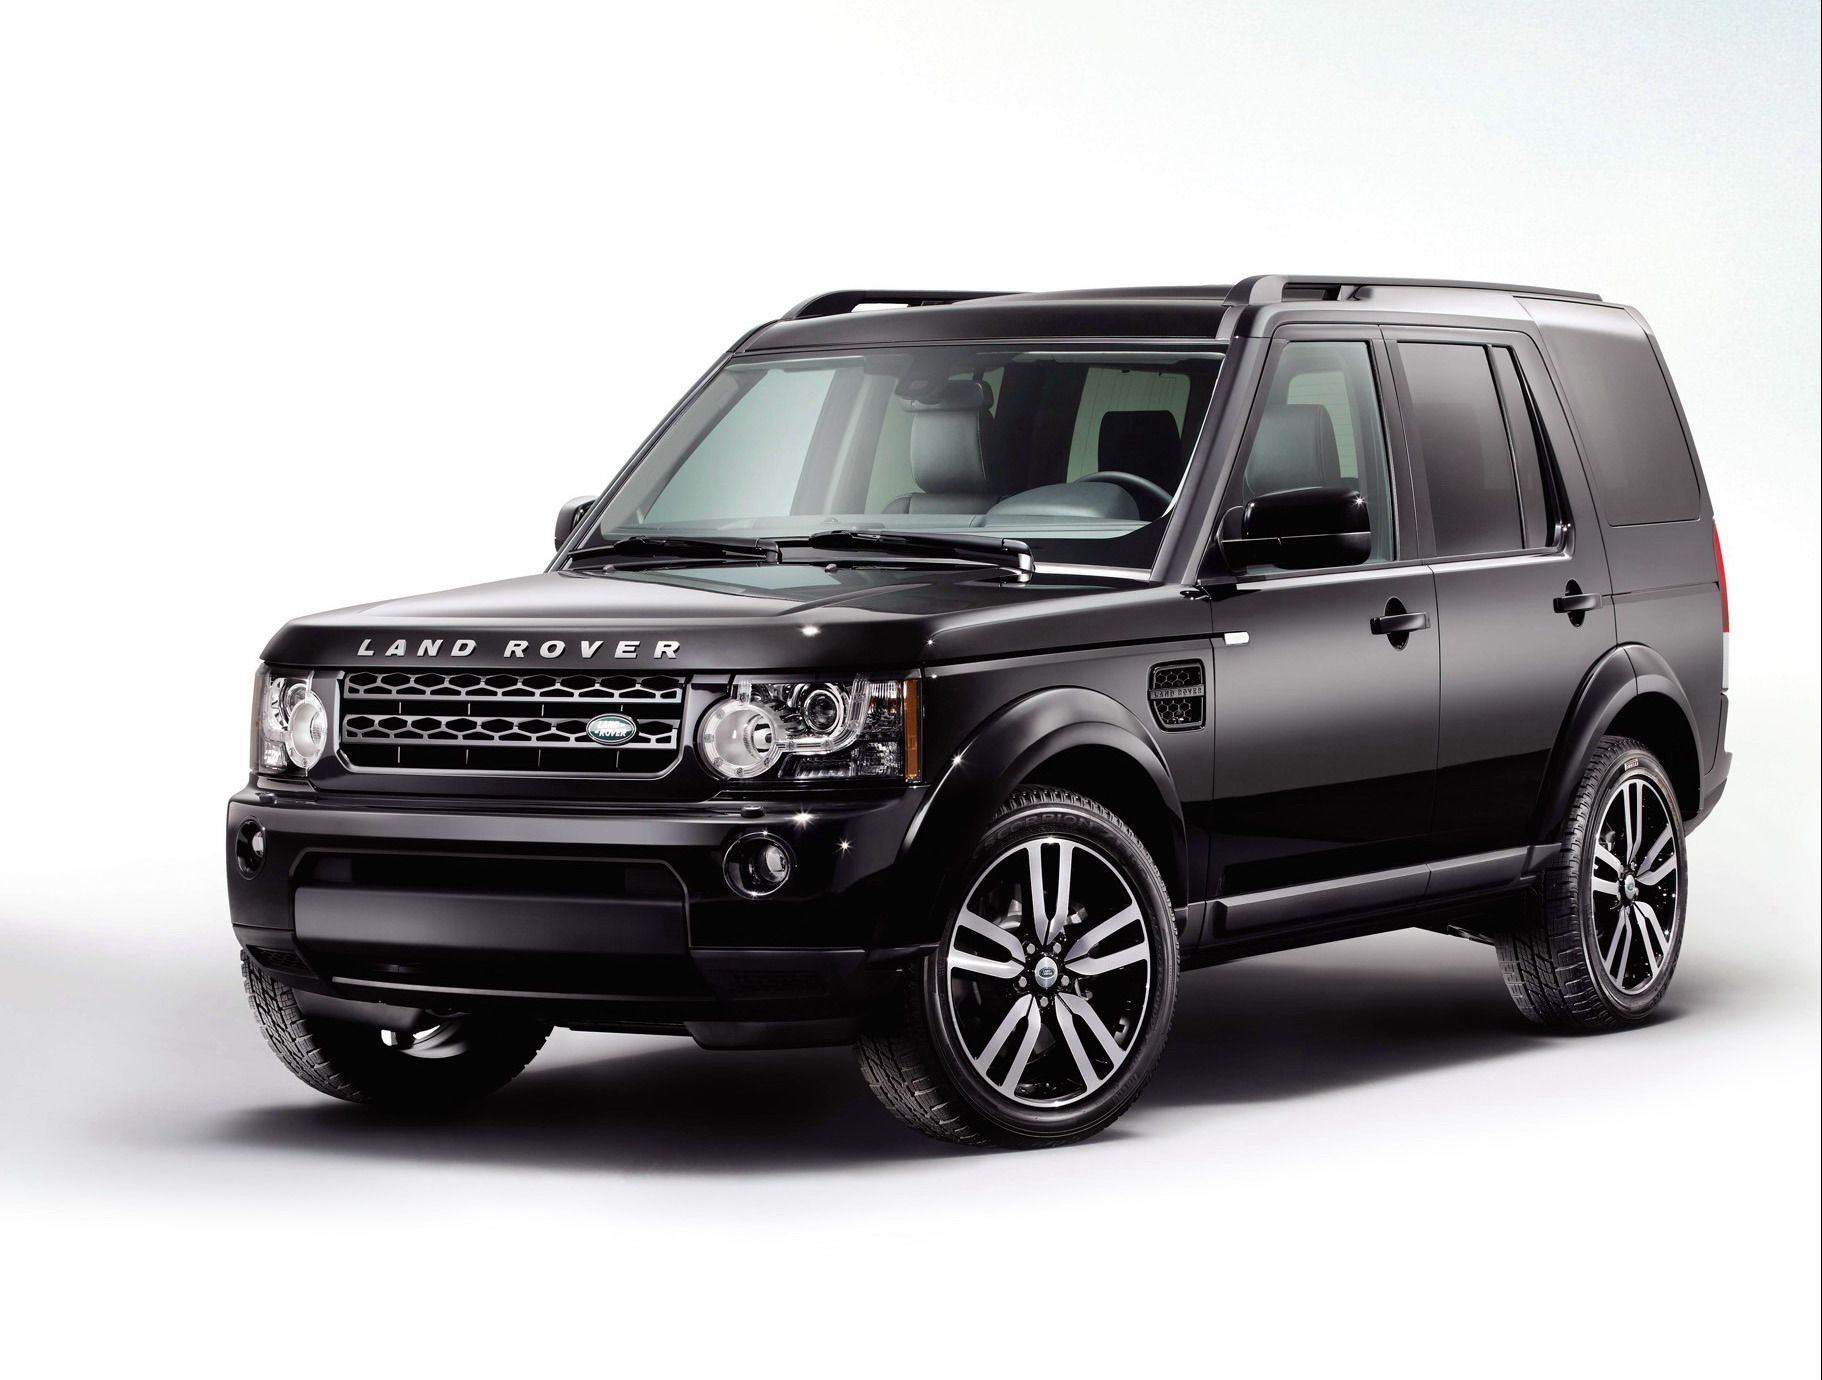 2011 Land Rover Discovery 4 Landmark Limited Editions